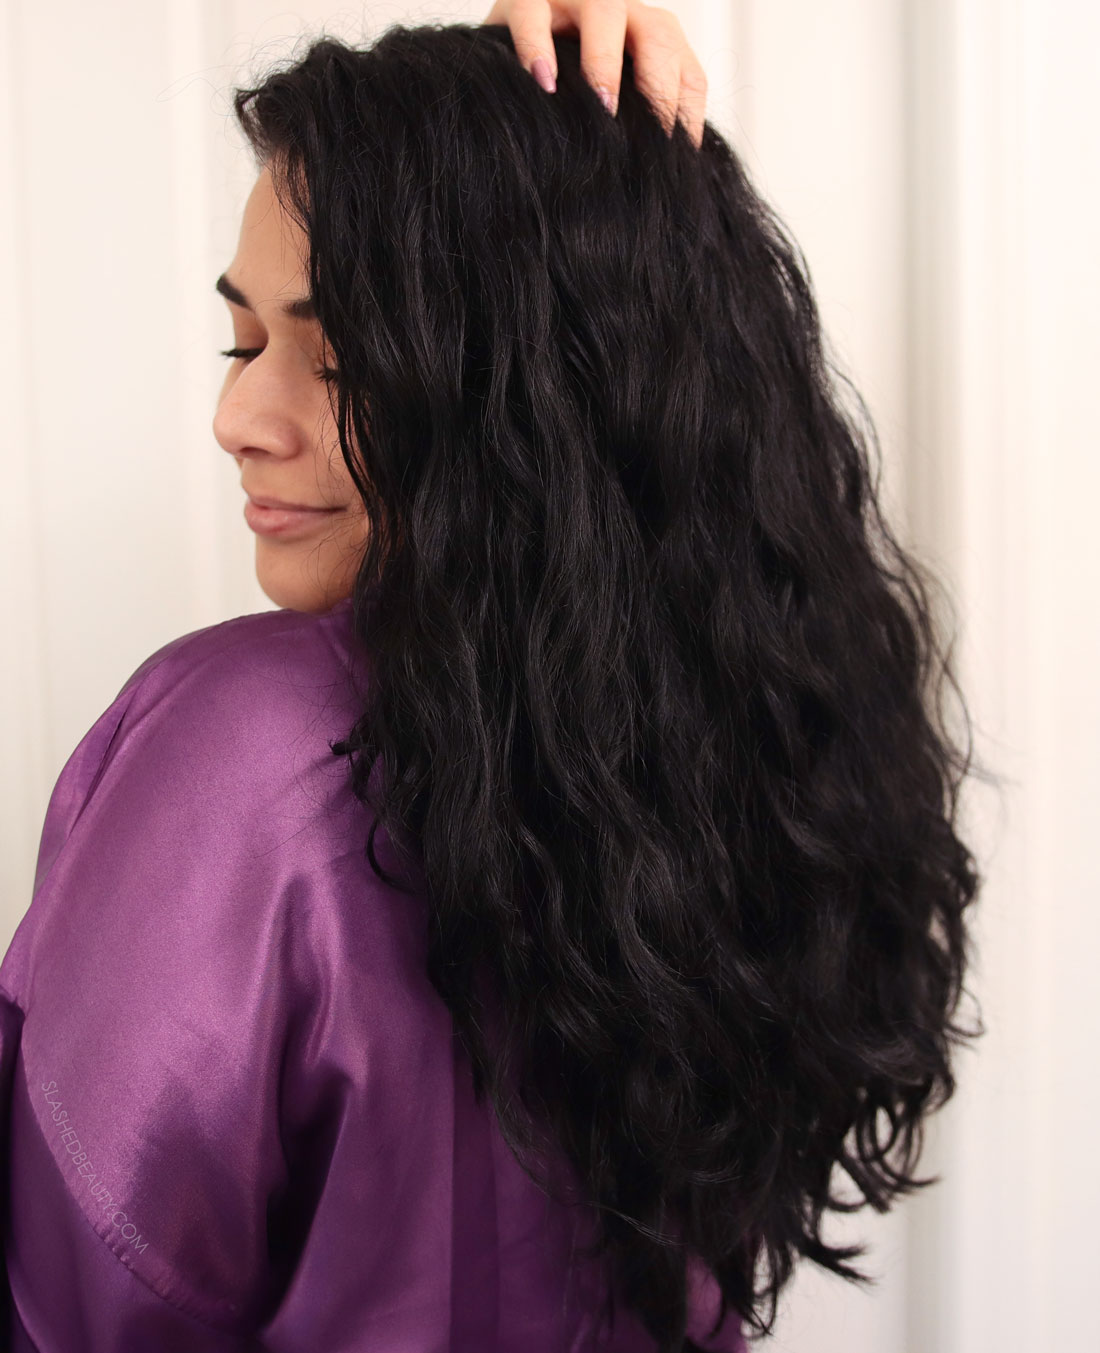 Miranda looking over her shoulder showing off thick, defined curly hair | Function of Beauty Customized Hair Care Review: Is it worth i? | Slashed Beauty